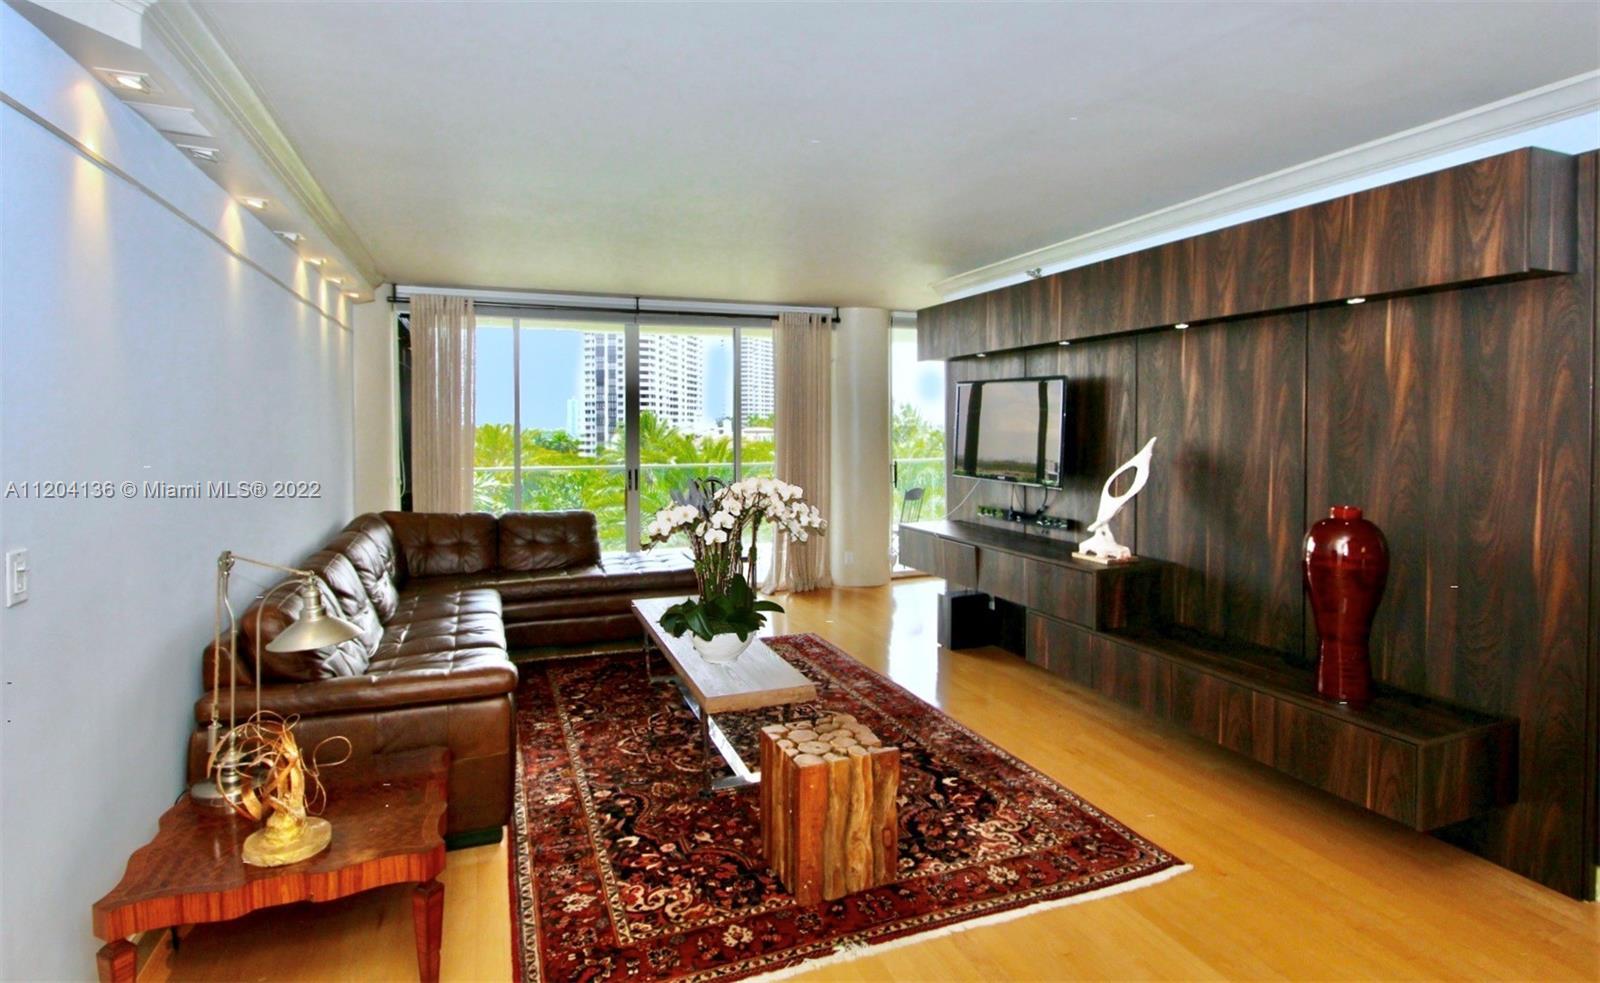 SPACIOUS 2 BEDROOM/ 2 BATHROOM UNIT WITH LOVELY GARDEN VIEW. UNIT IS READY TO MOVE IN WITH BUILT-IN 